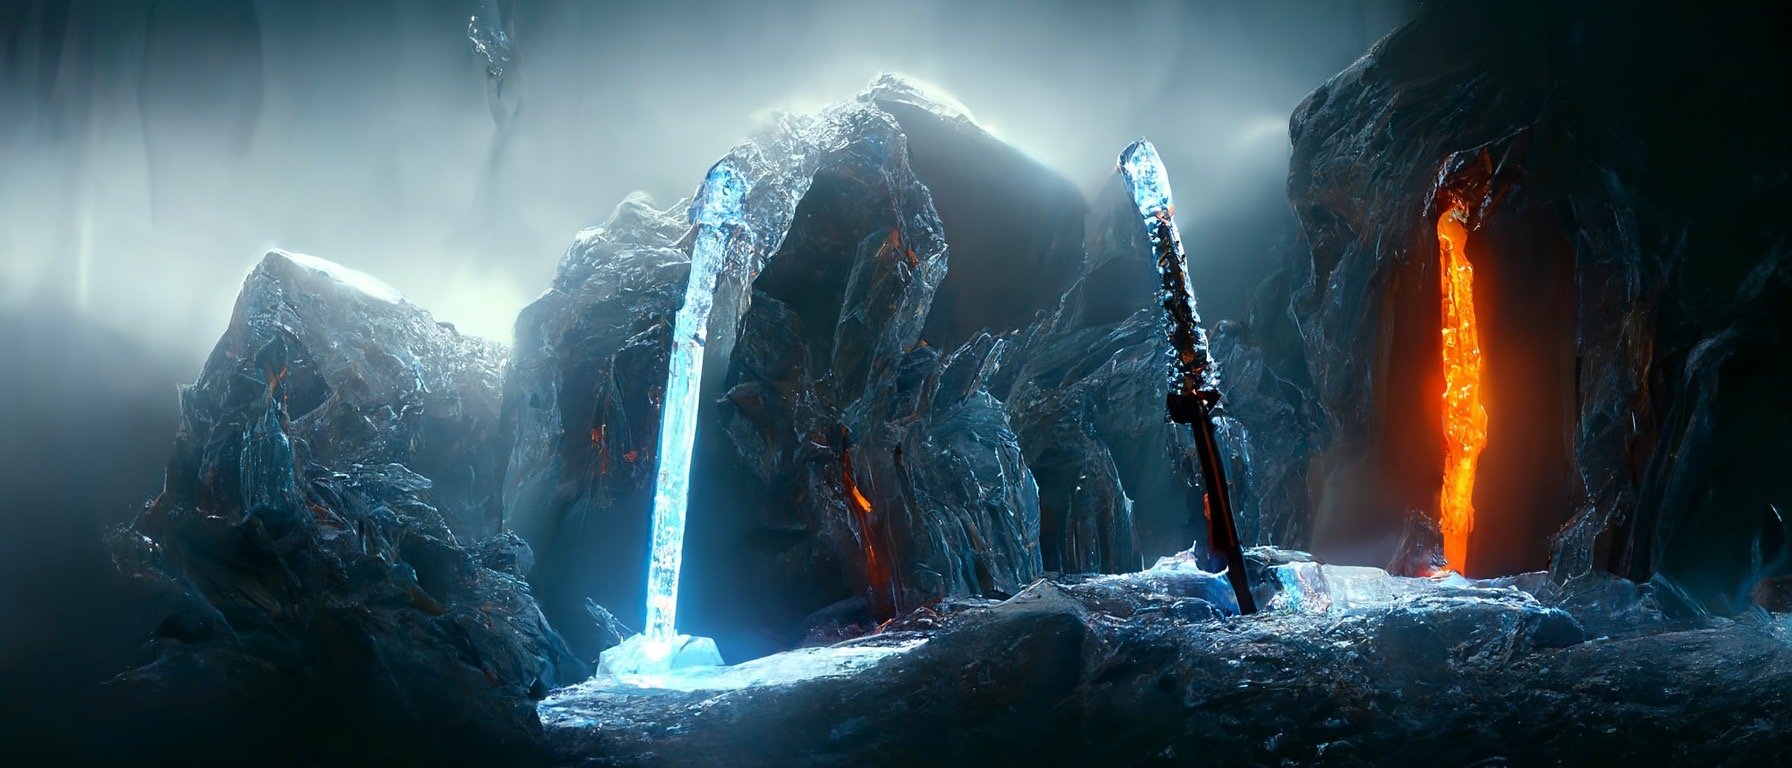 9bdb907a-96e1-4b59-acd2-484db8a09314_S3RAPH_frozen_sword_in_ice_cave_with_reflective_crystals._epic_lava_falls._8k_cinematic_composition_render_.JPG